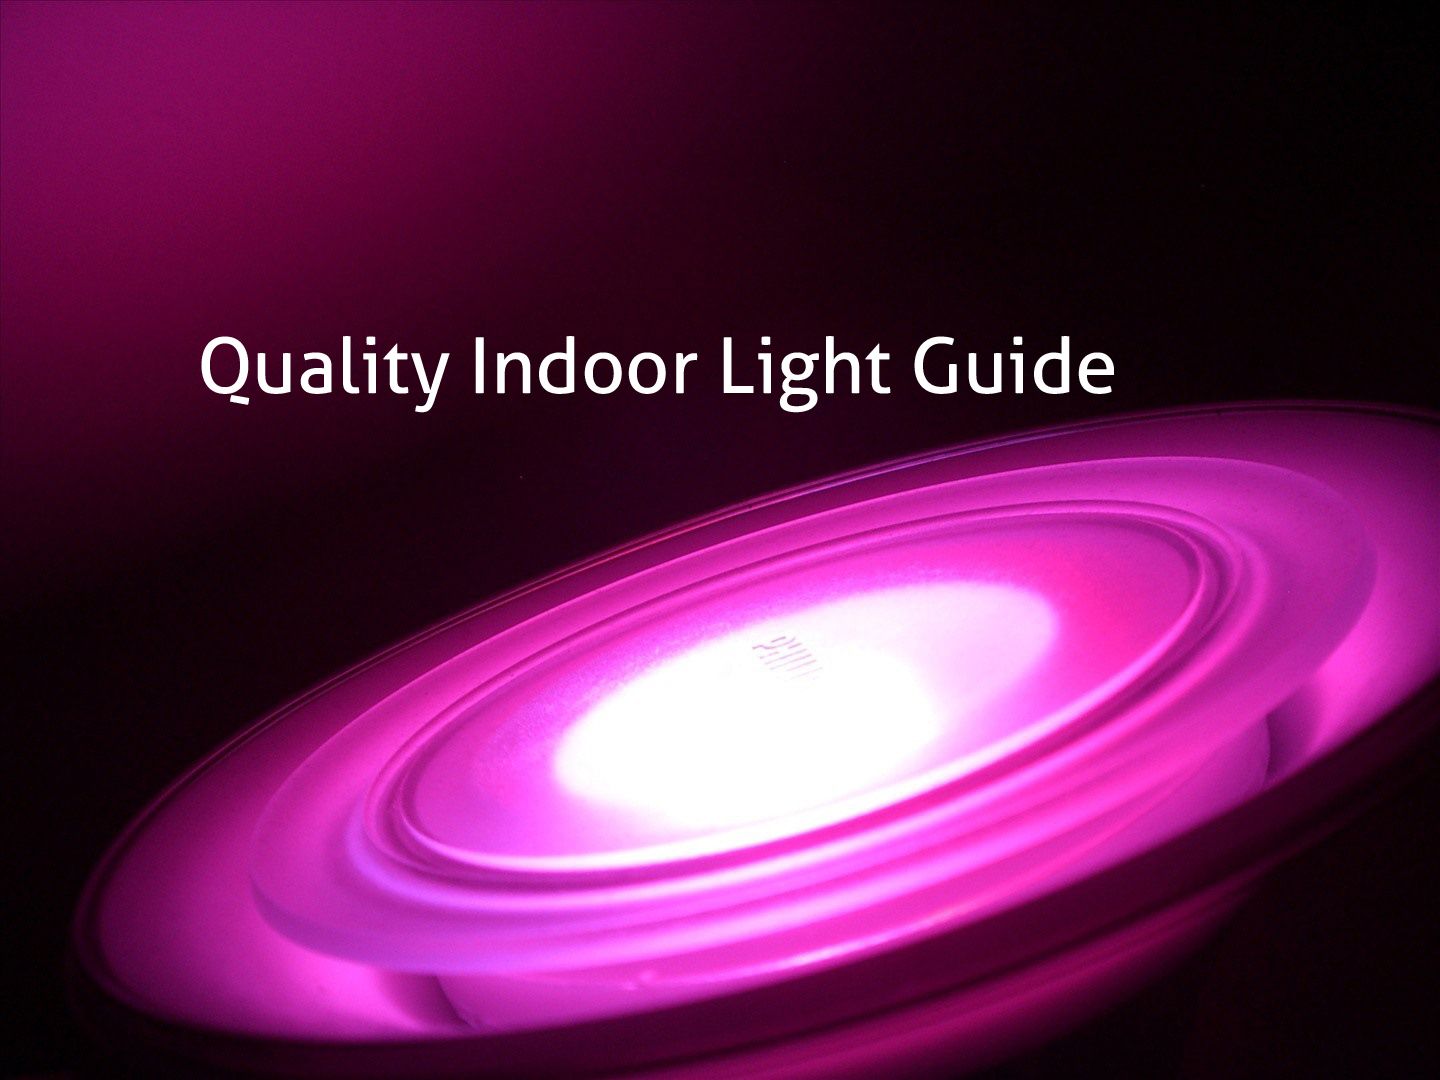 There's some good (and very bad) news for Philips Hue smart light owners